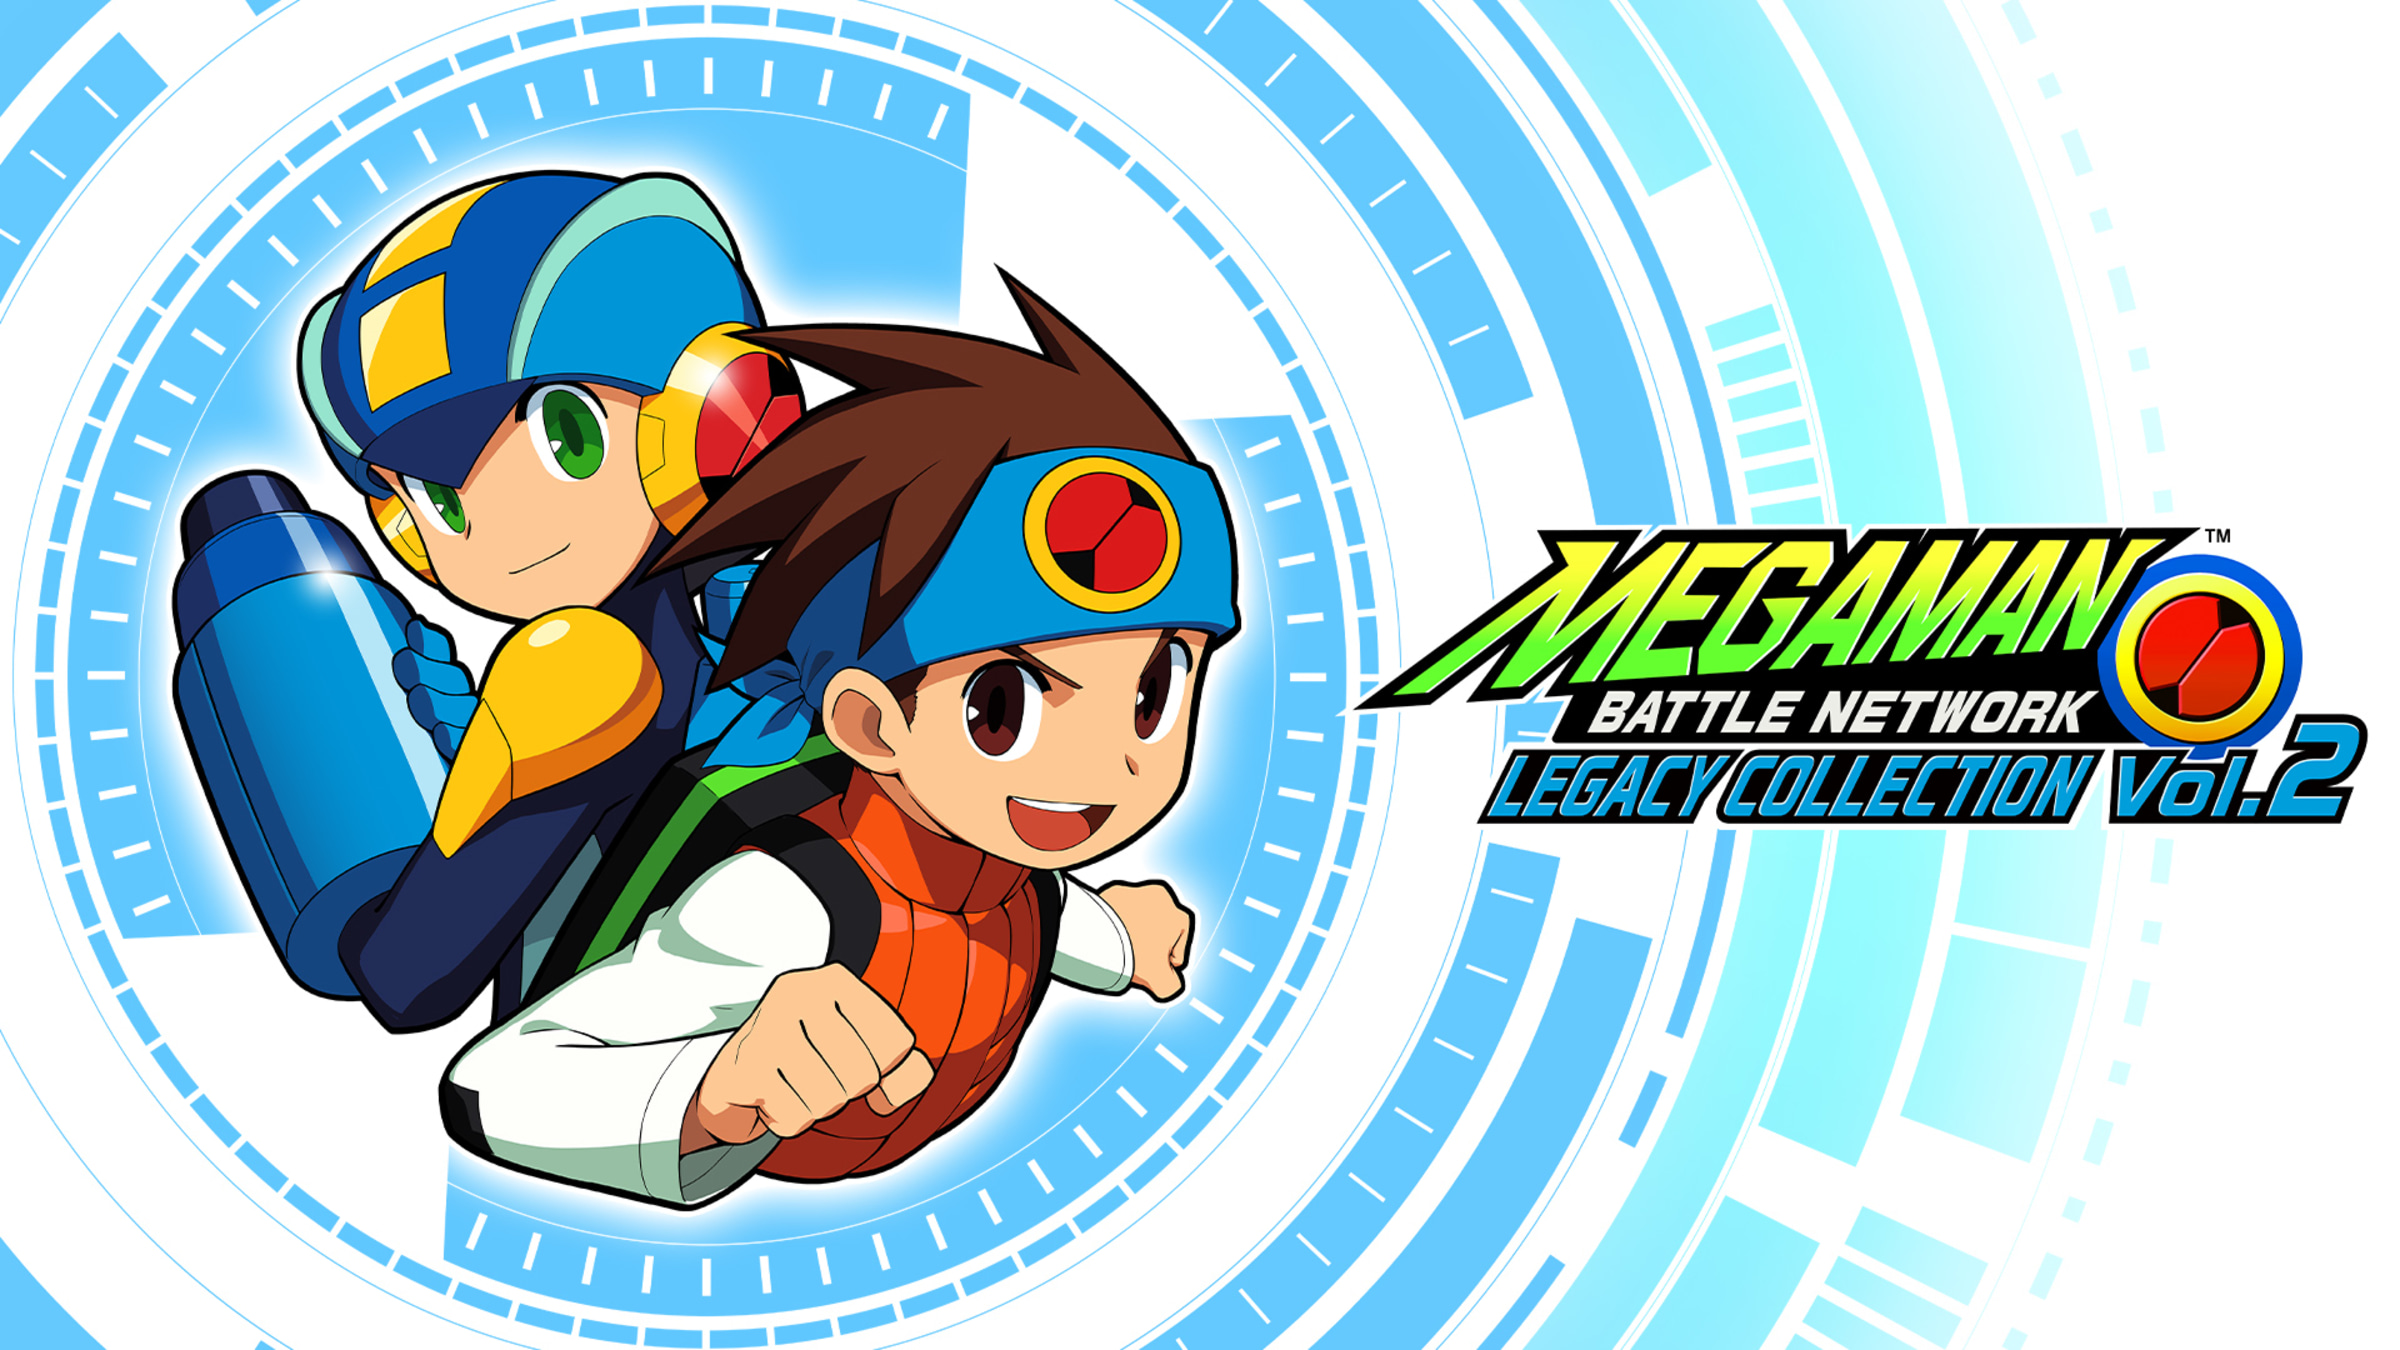 mega-man-battle-network-legacy-collection-vol-2-for-nintendo-switch-nintendo-official-site